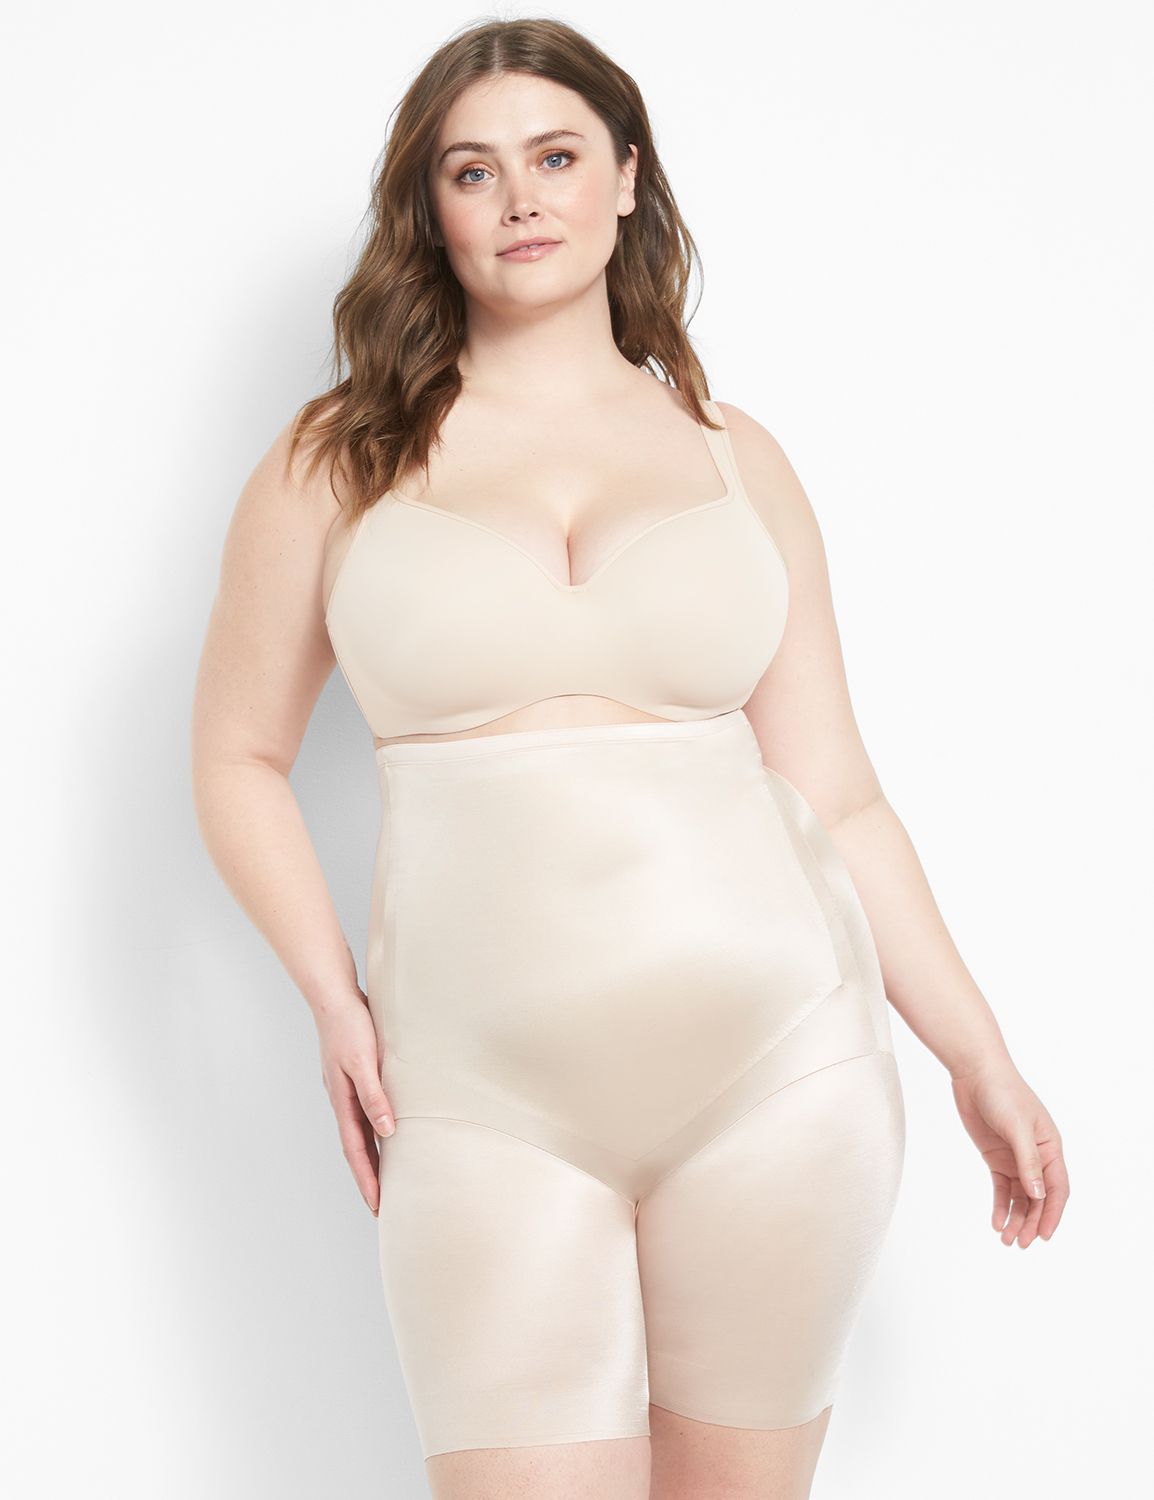 Cacique by Lane Bryant. Open-bust thigh shaper.